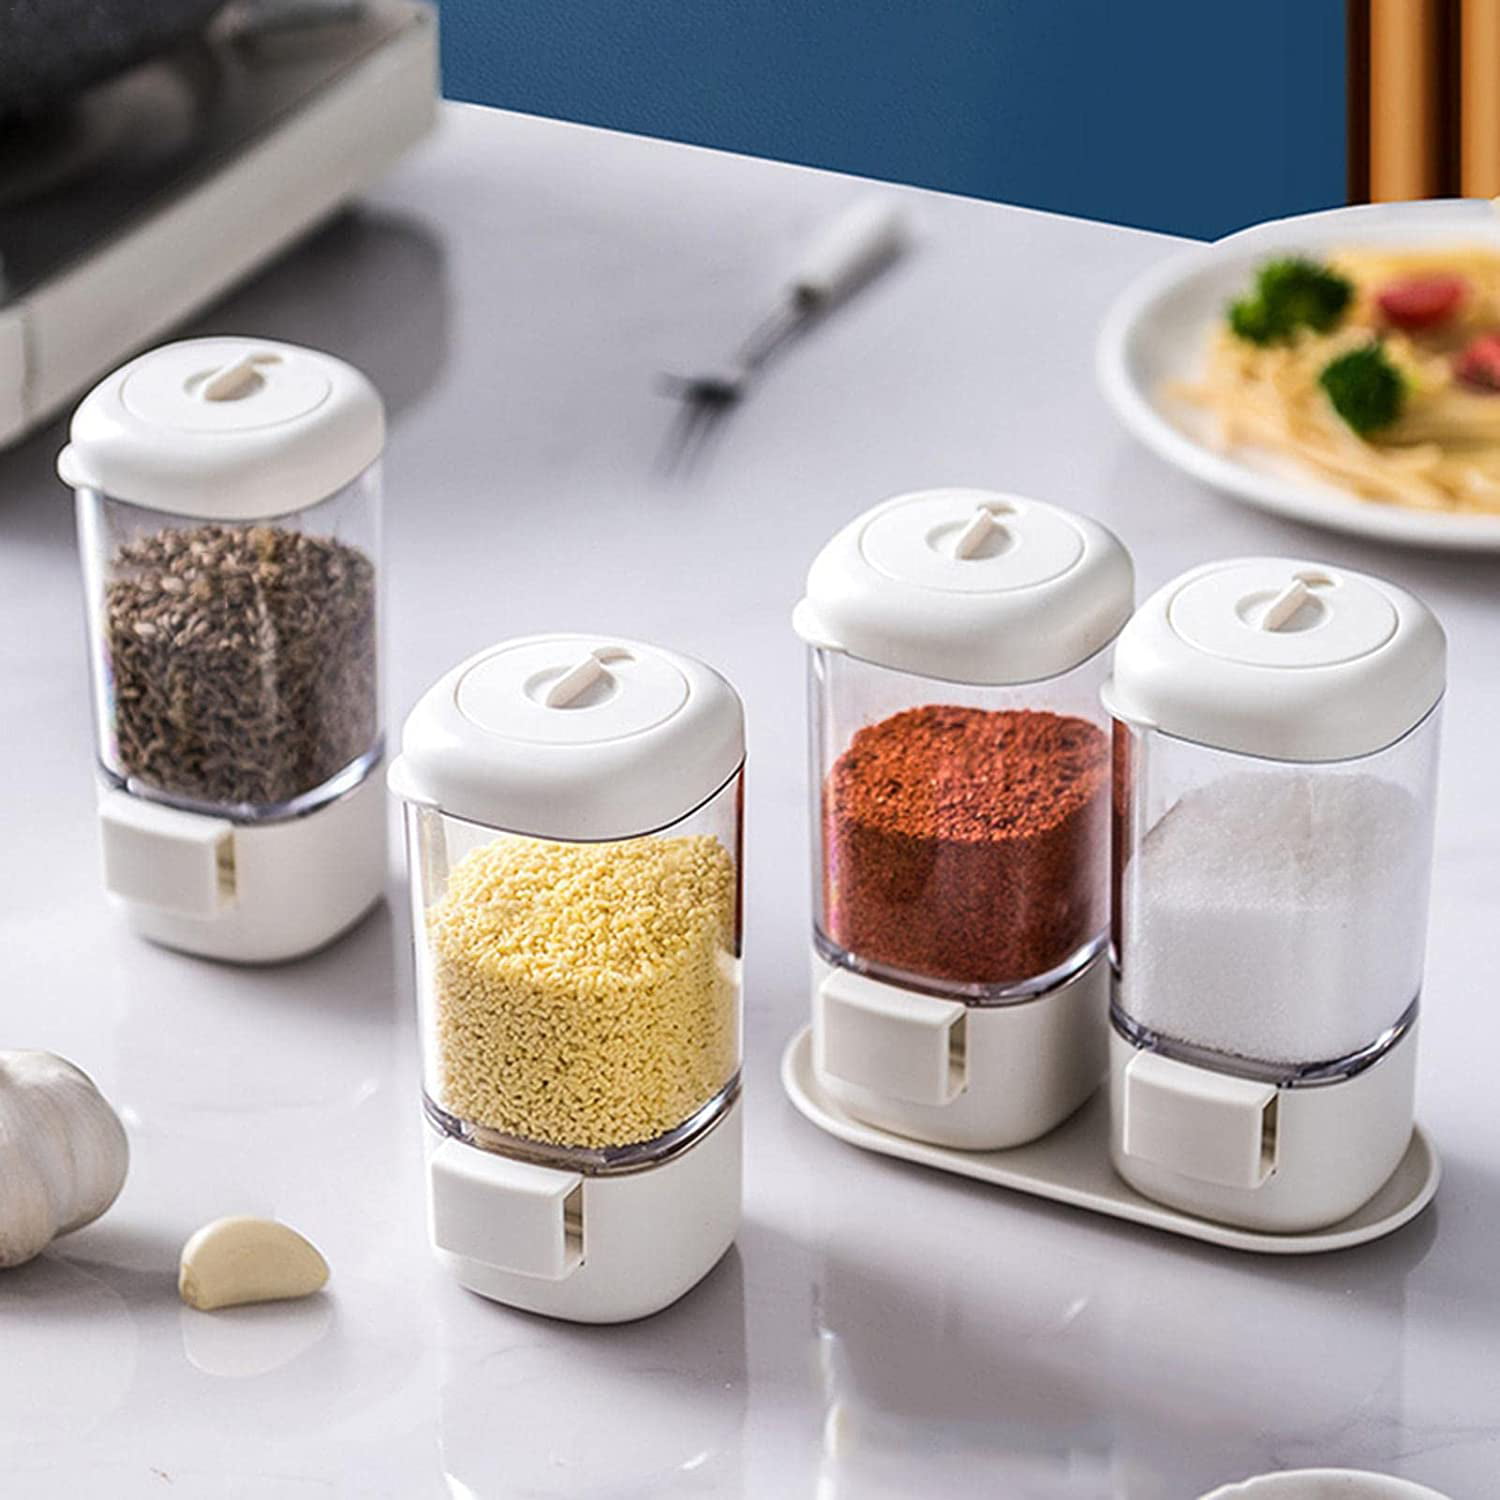 3Pcs Large Salt and Pepper Shakers with Handle, Kitchen Stainless Steel  Salt Shaker Seasoning Bottle Container Dry Rub Spice Dispenser with Lid  Holes